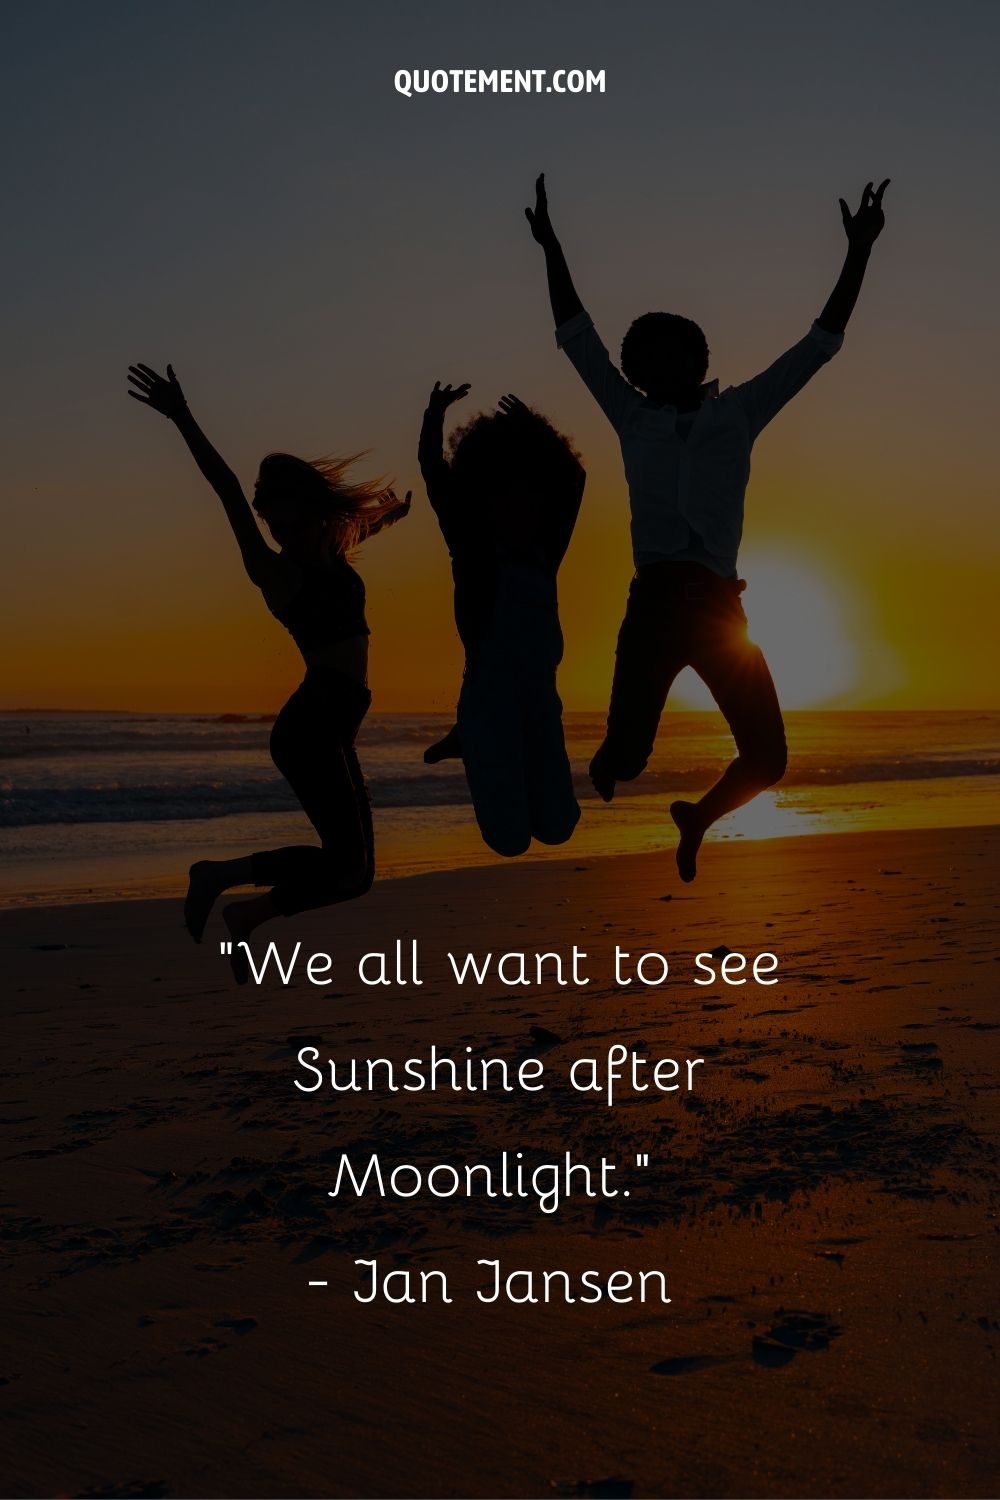 We all want to see Sunshine after Moonlight